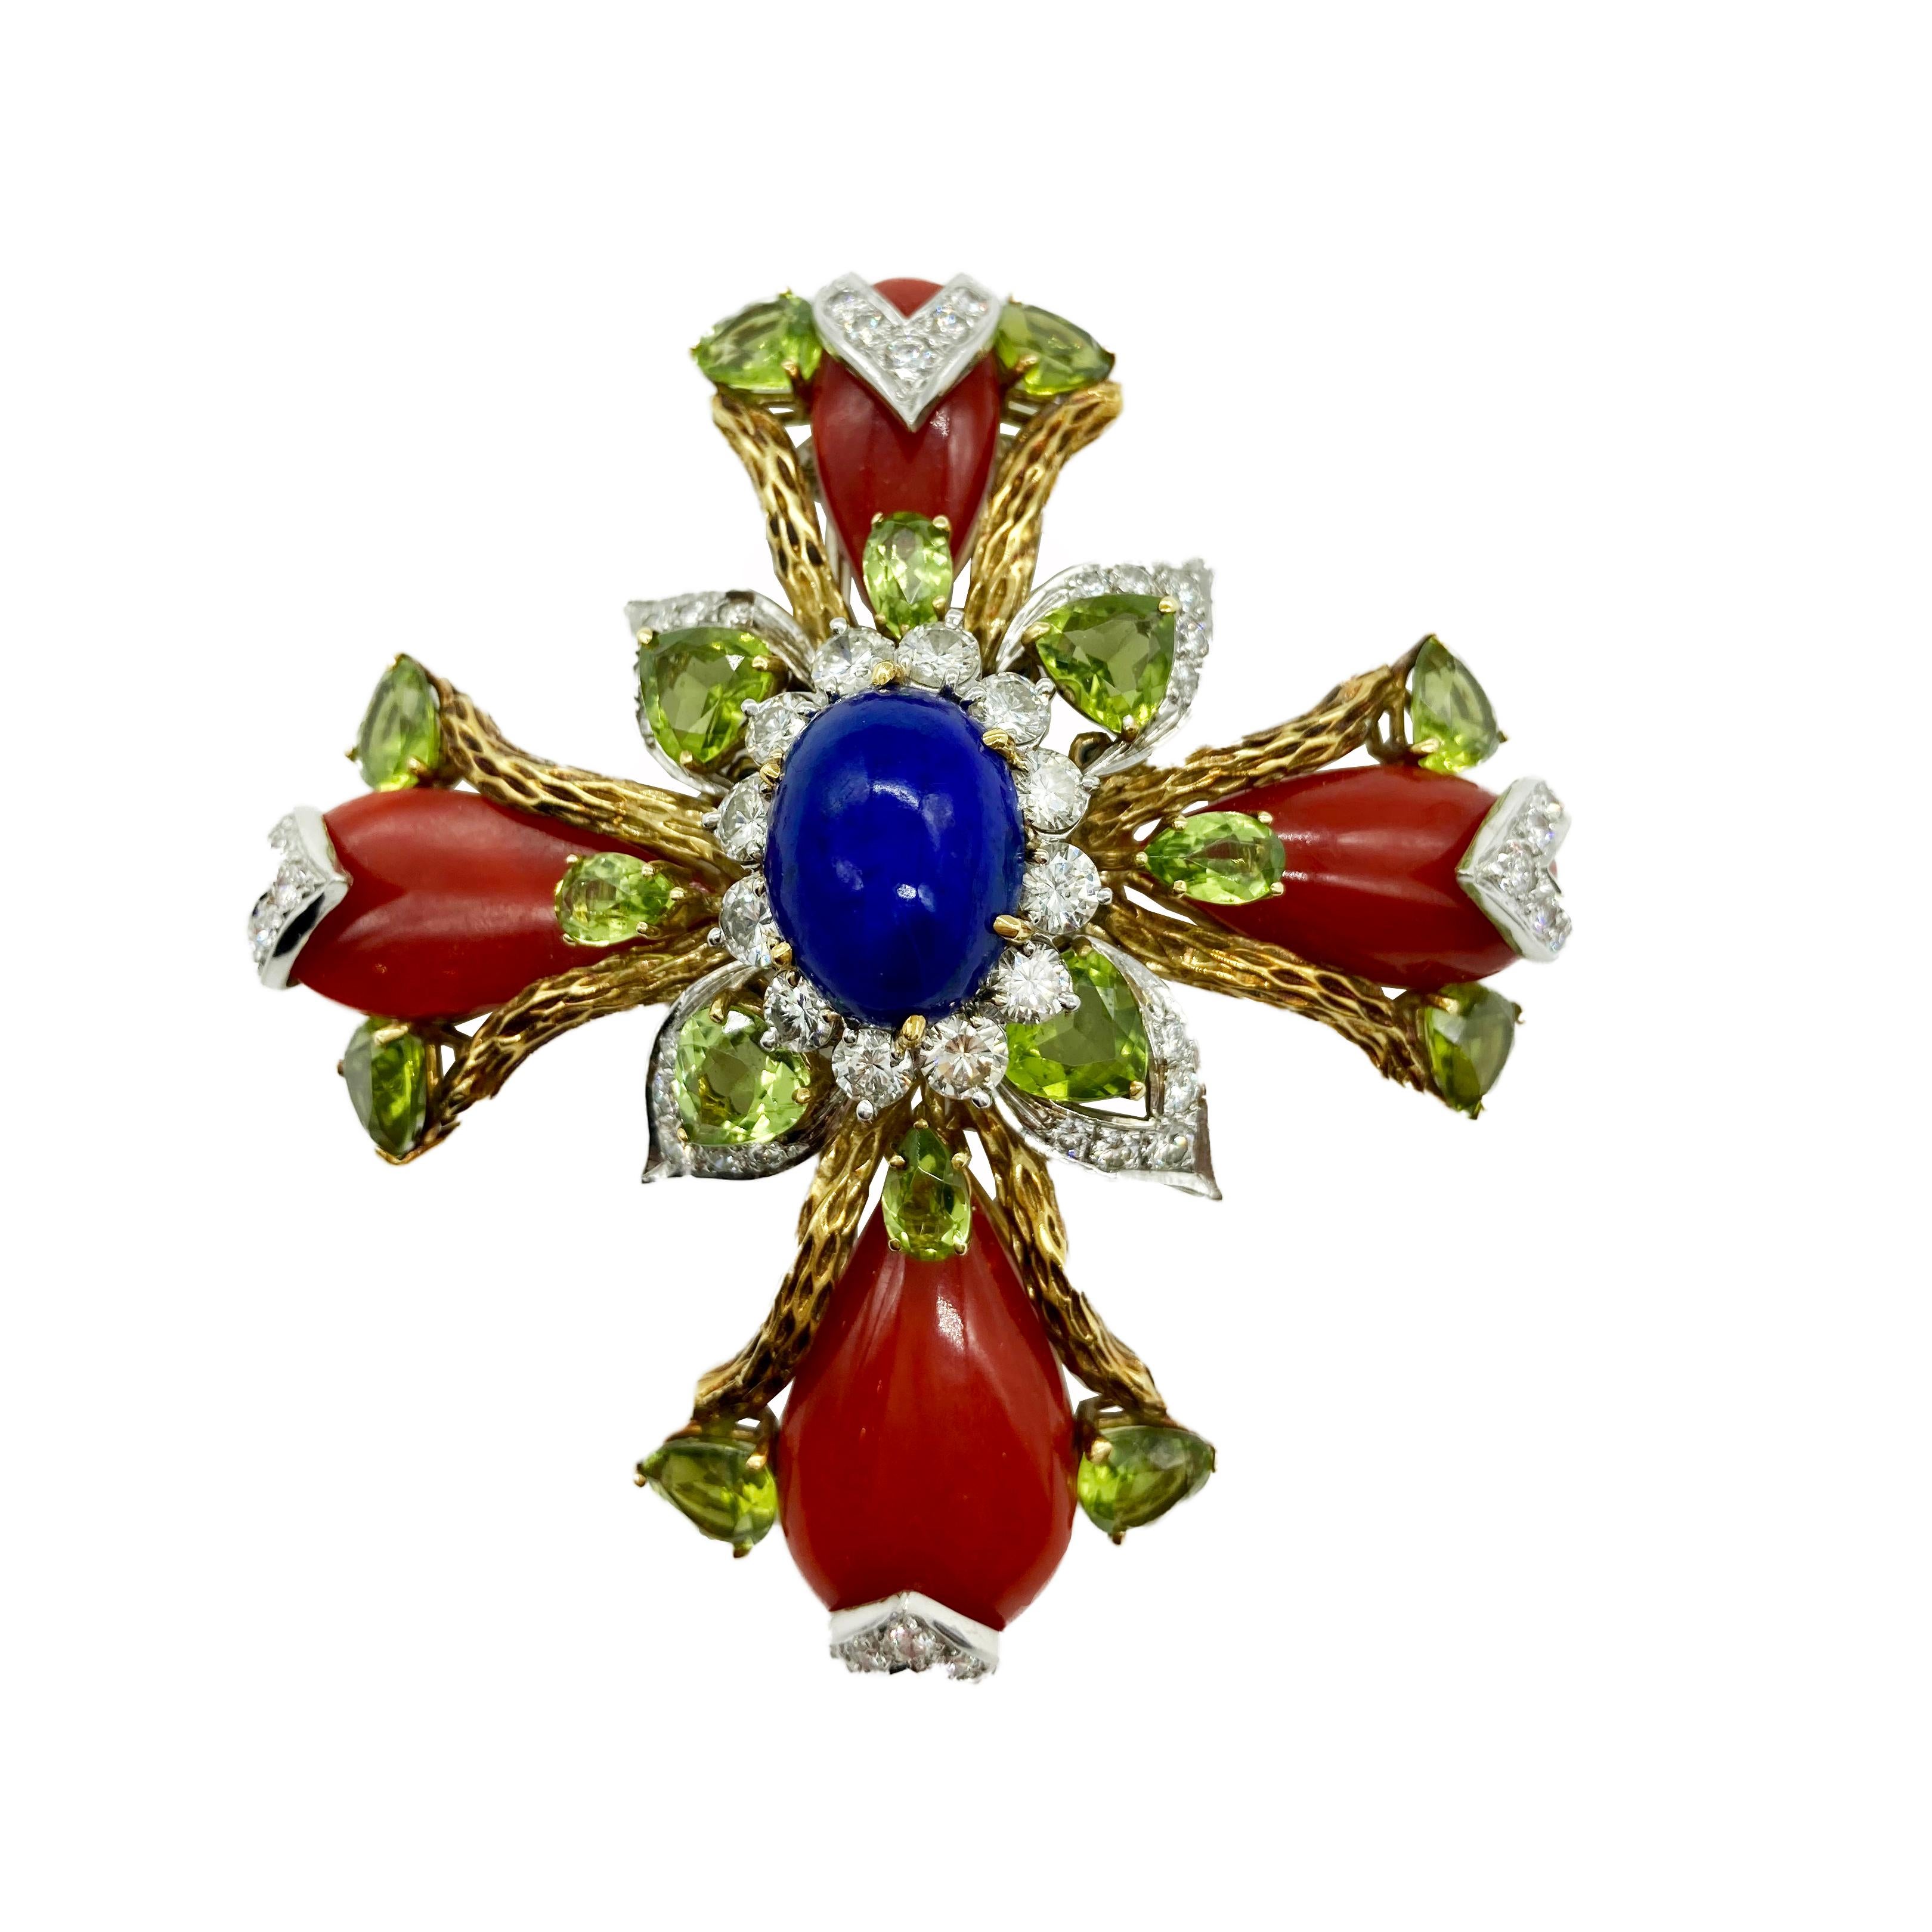 A chic statement brooch of cross design featuring coral, lapis, peridot, and diamonds. Circa 1960s.